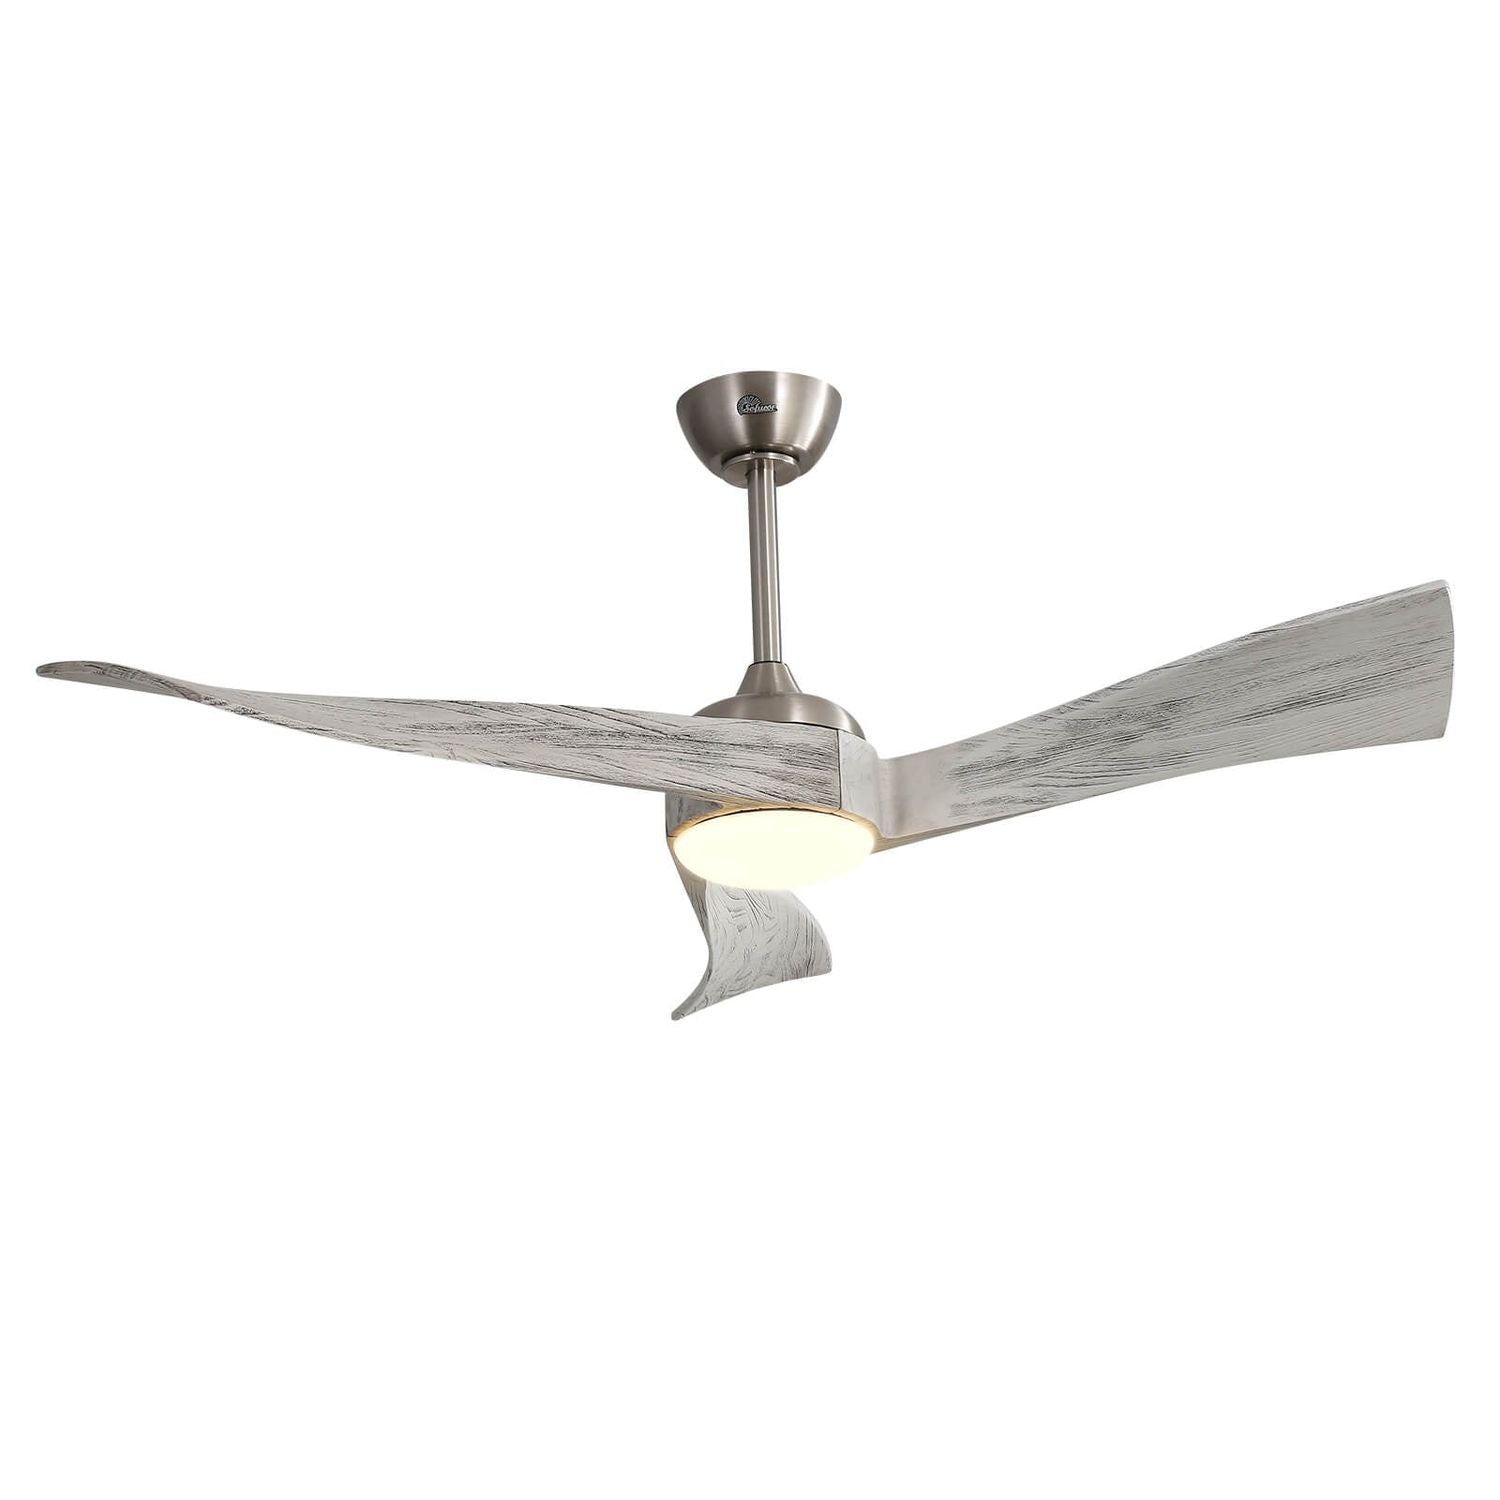 Builder Fans Co. Wood Blade Ceiling Fan with LED Light, 52 Inch - Brushed Nickel, Grey